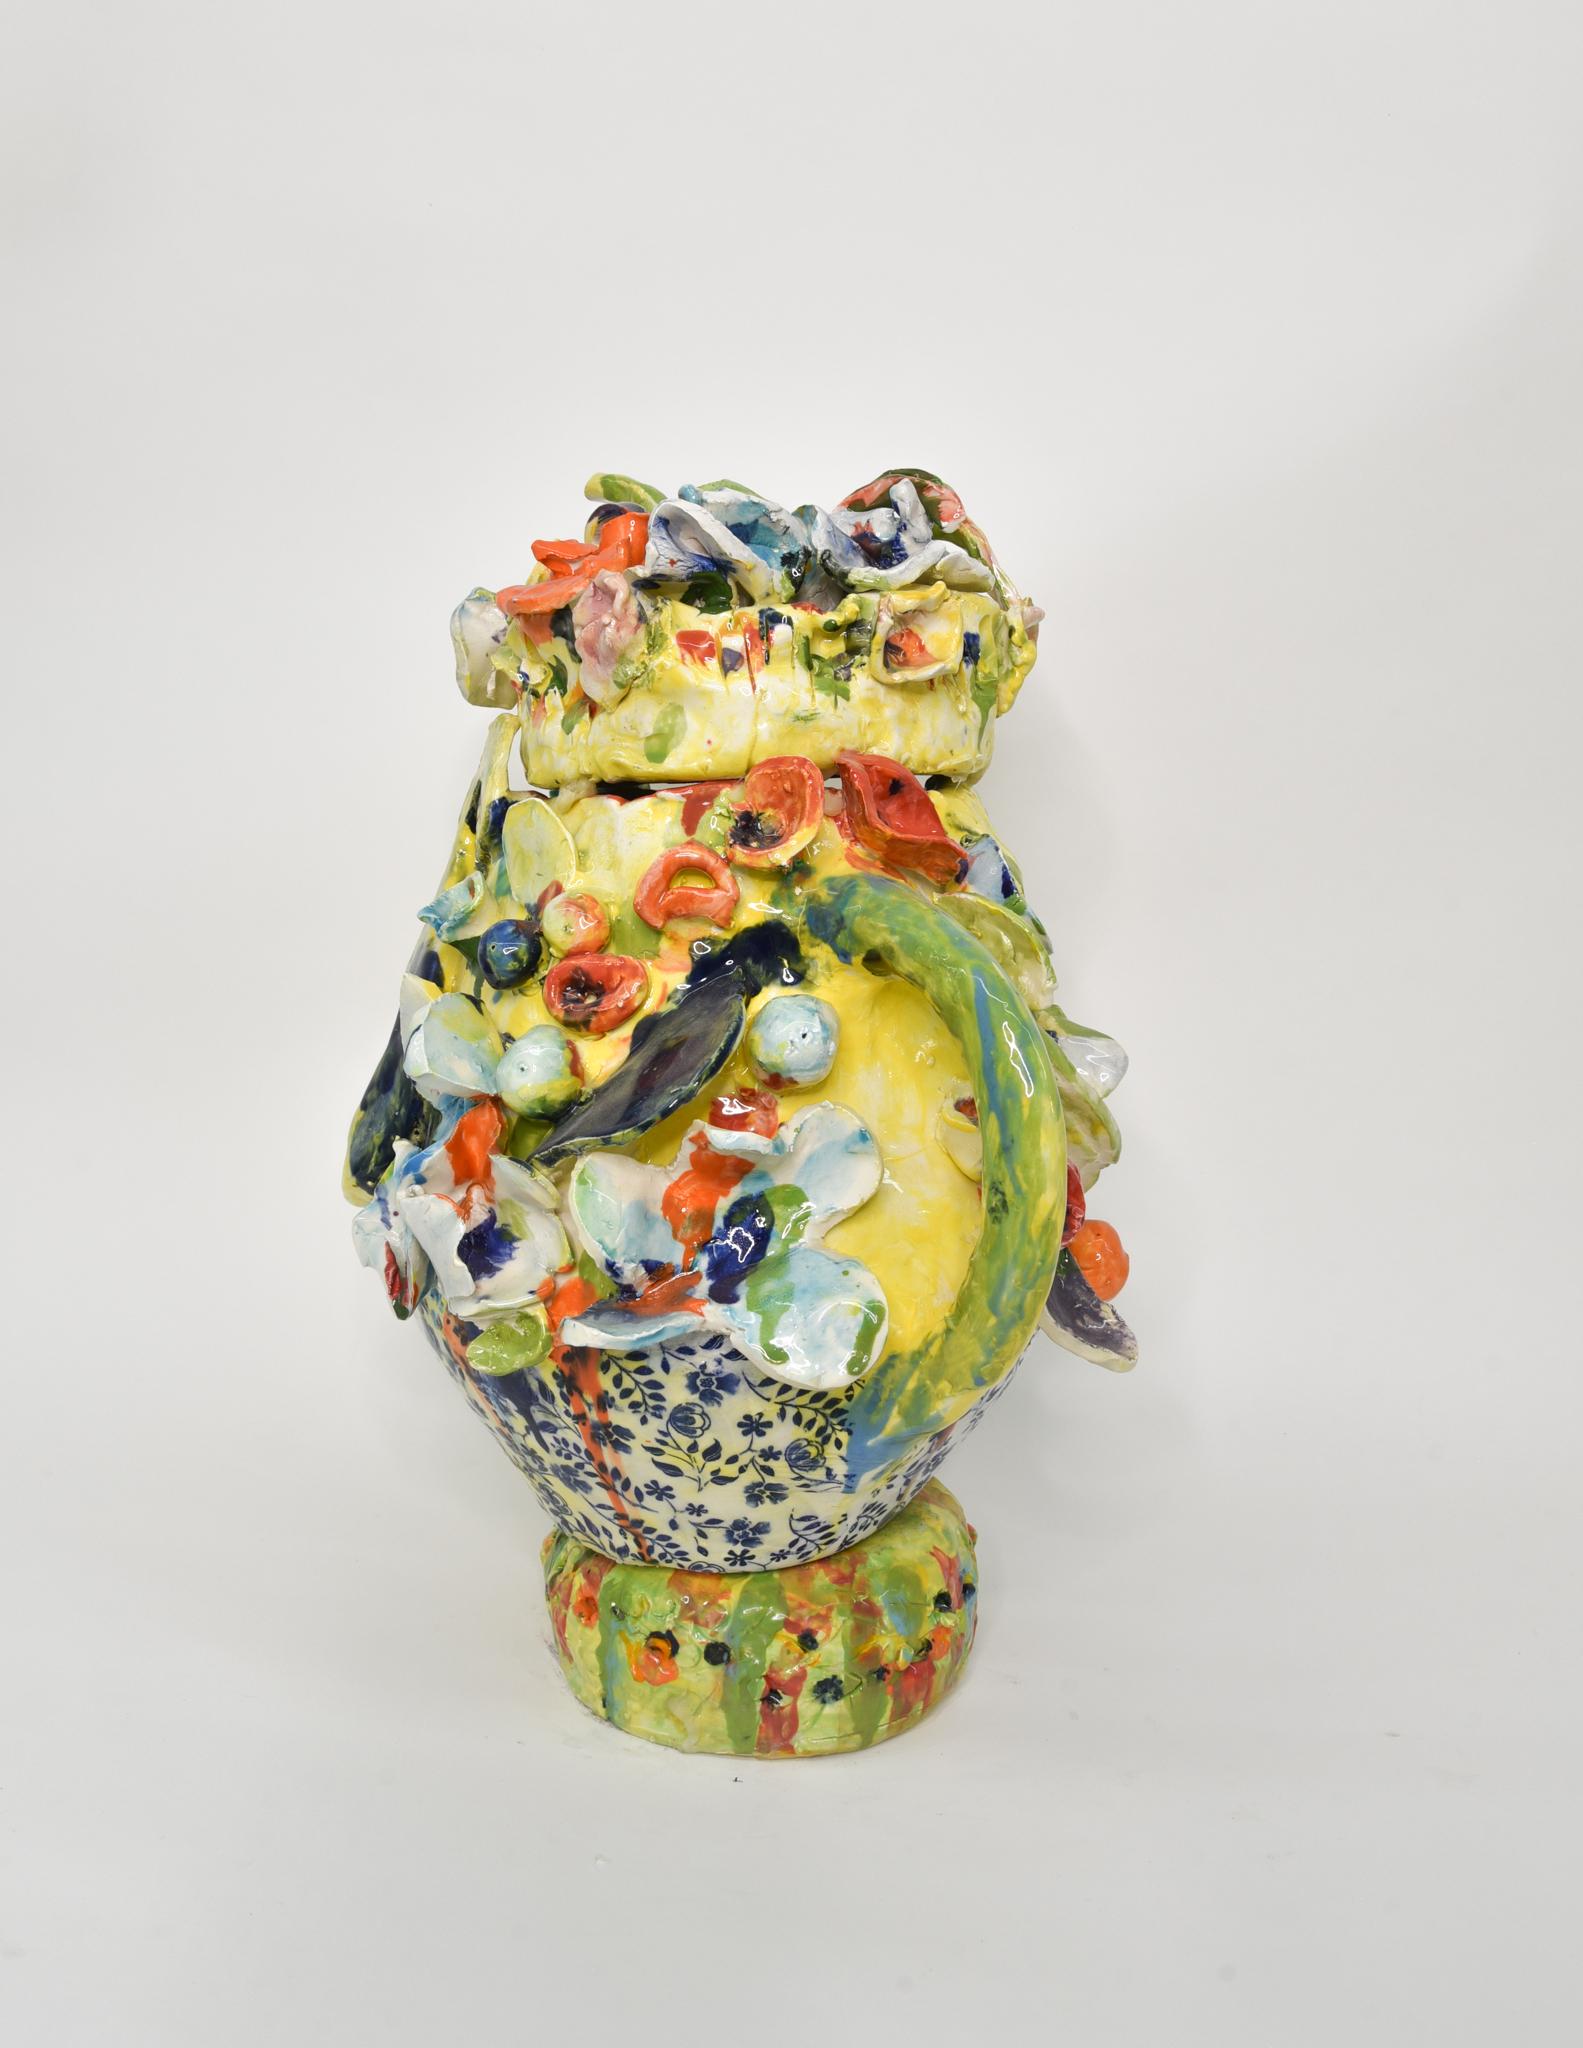 Yellow Flowers. Glazed ceramic abstract jar sculpture - Sculpture by Charo Oquet